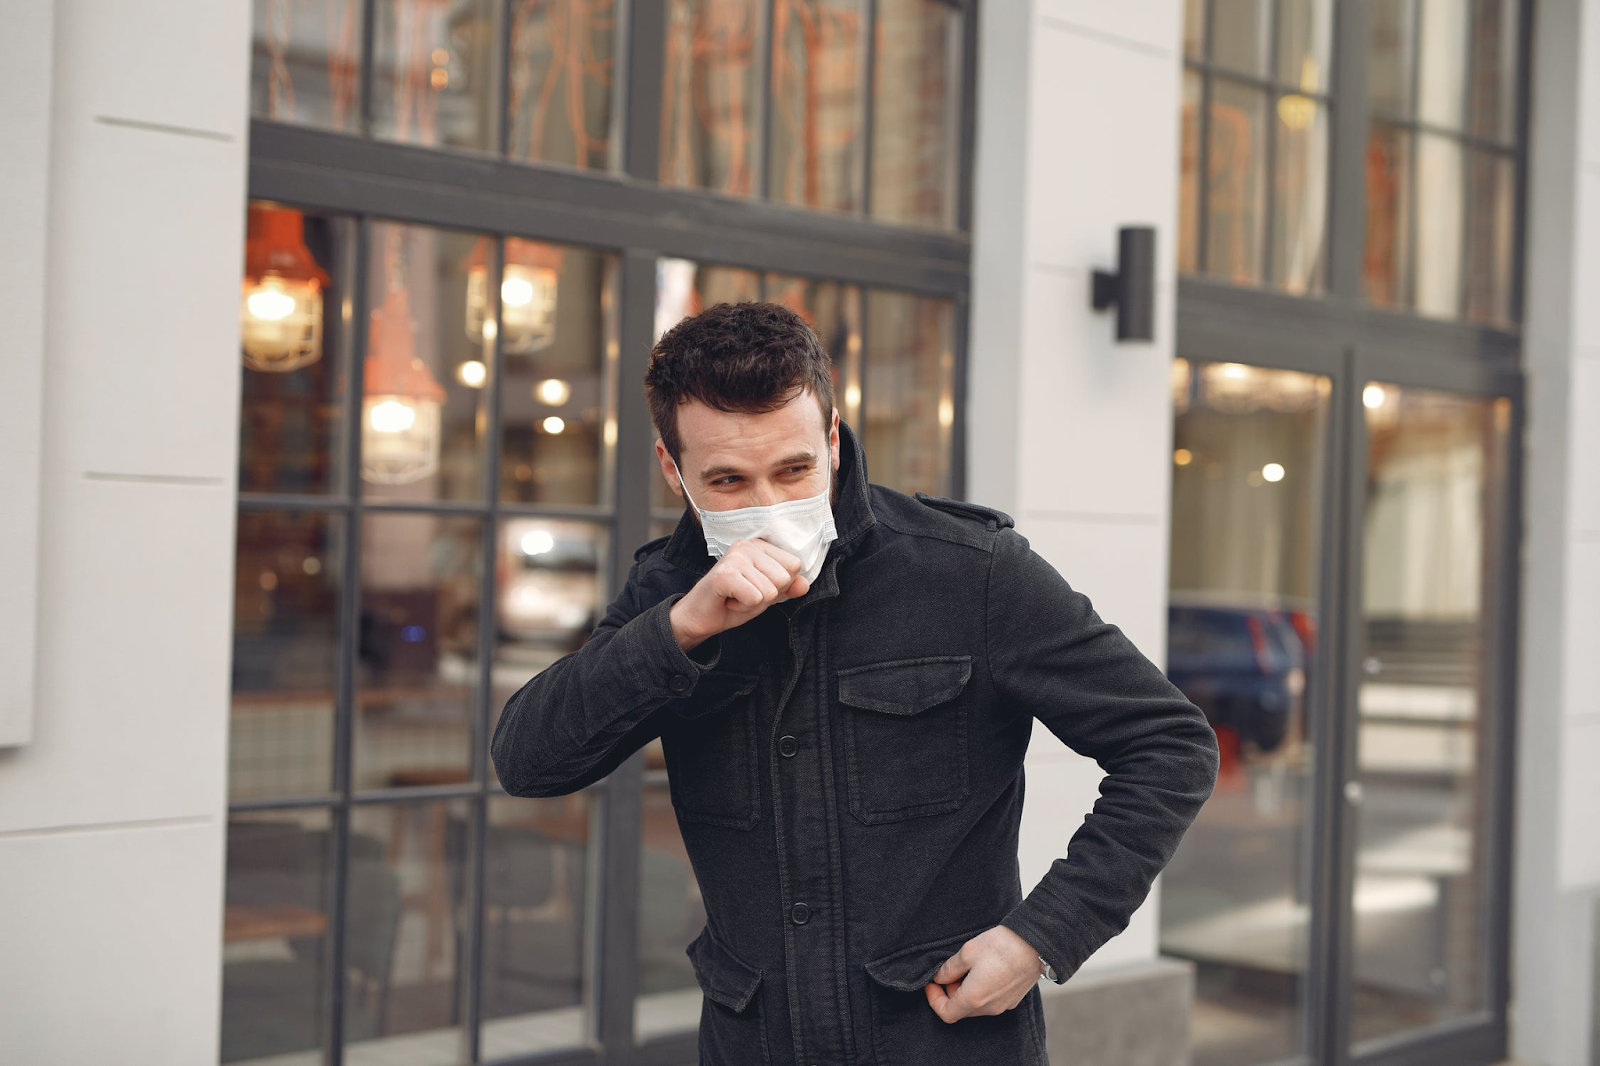 pertussis vs. croup | Photo by Gustavo Fring from Pexels | https://www.pexels.com/photo/a-man-in-black-jacket-wearing-a-face-mask-3983402/?utm_content=attributionCopyText&utm_medium=referral&utm_source=pexels